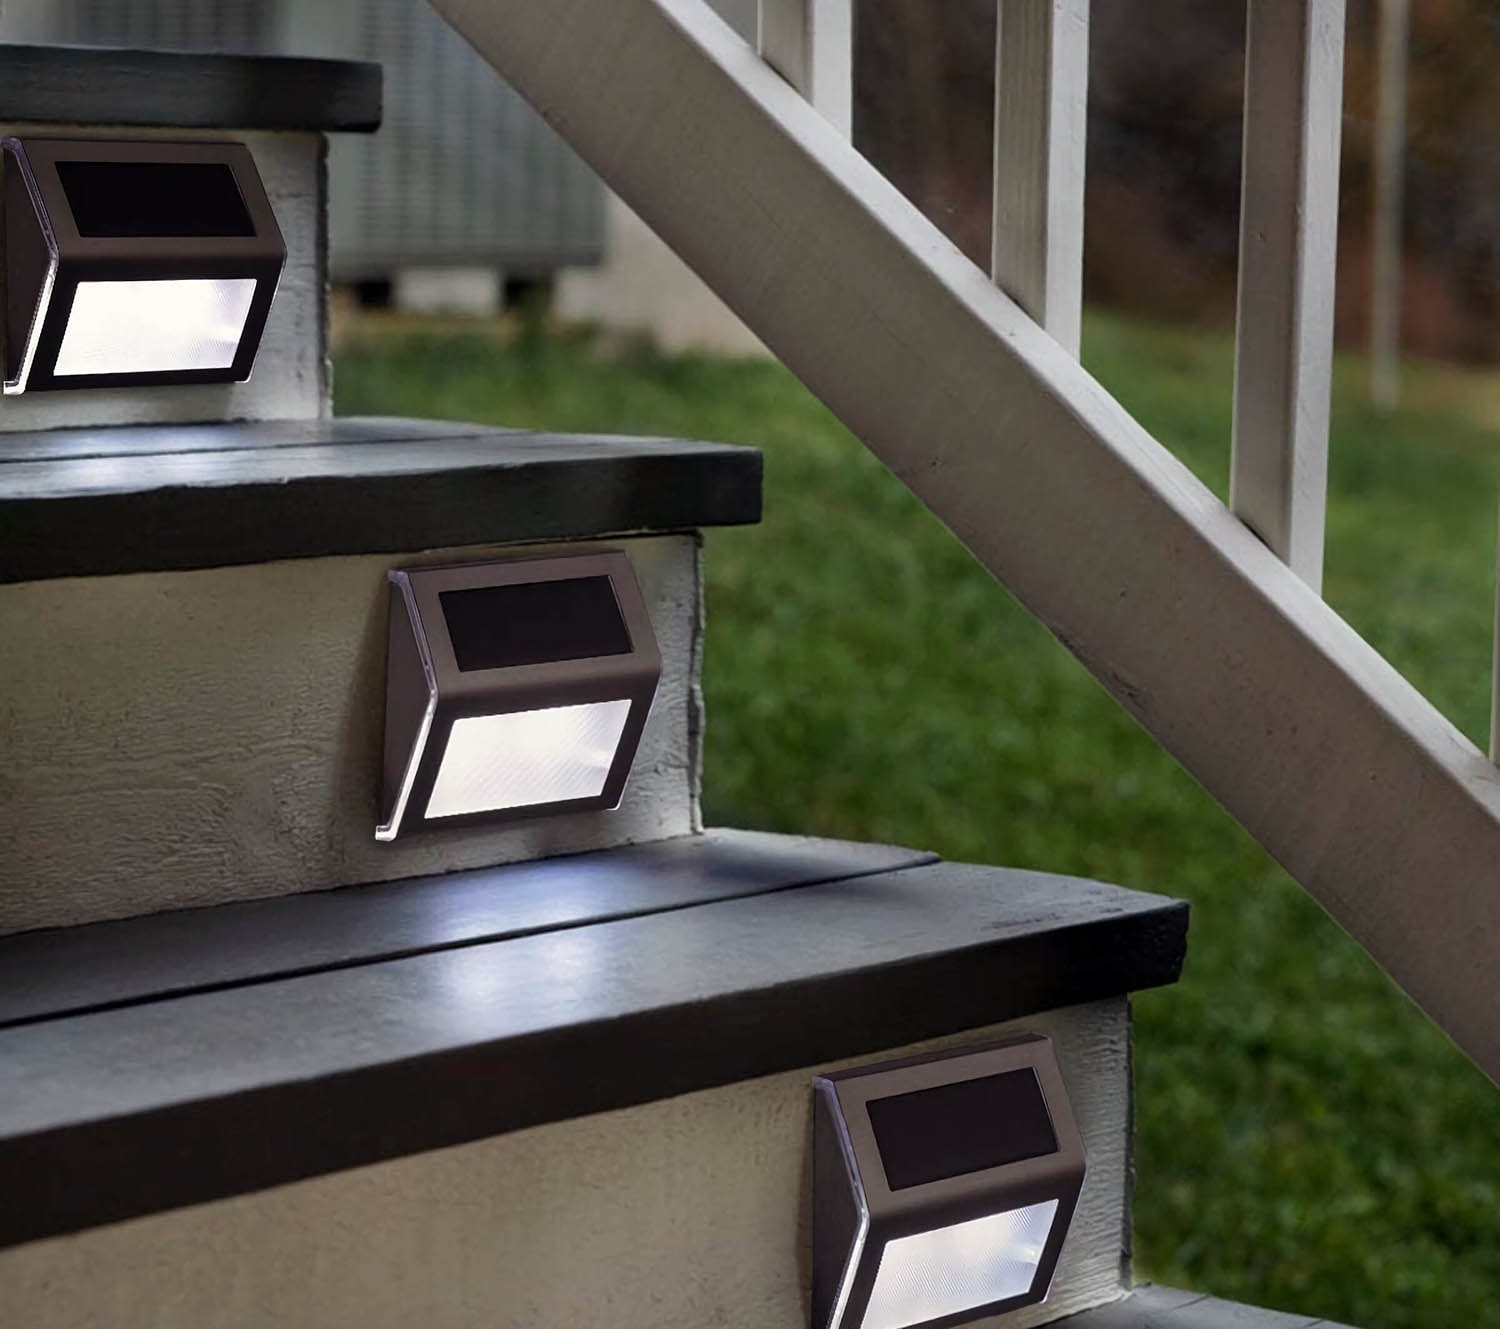 LED Solar Stairs Light Garden Yard Waterproof Stainless Steel Outdoor Wall Lamp 